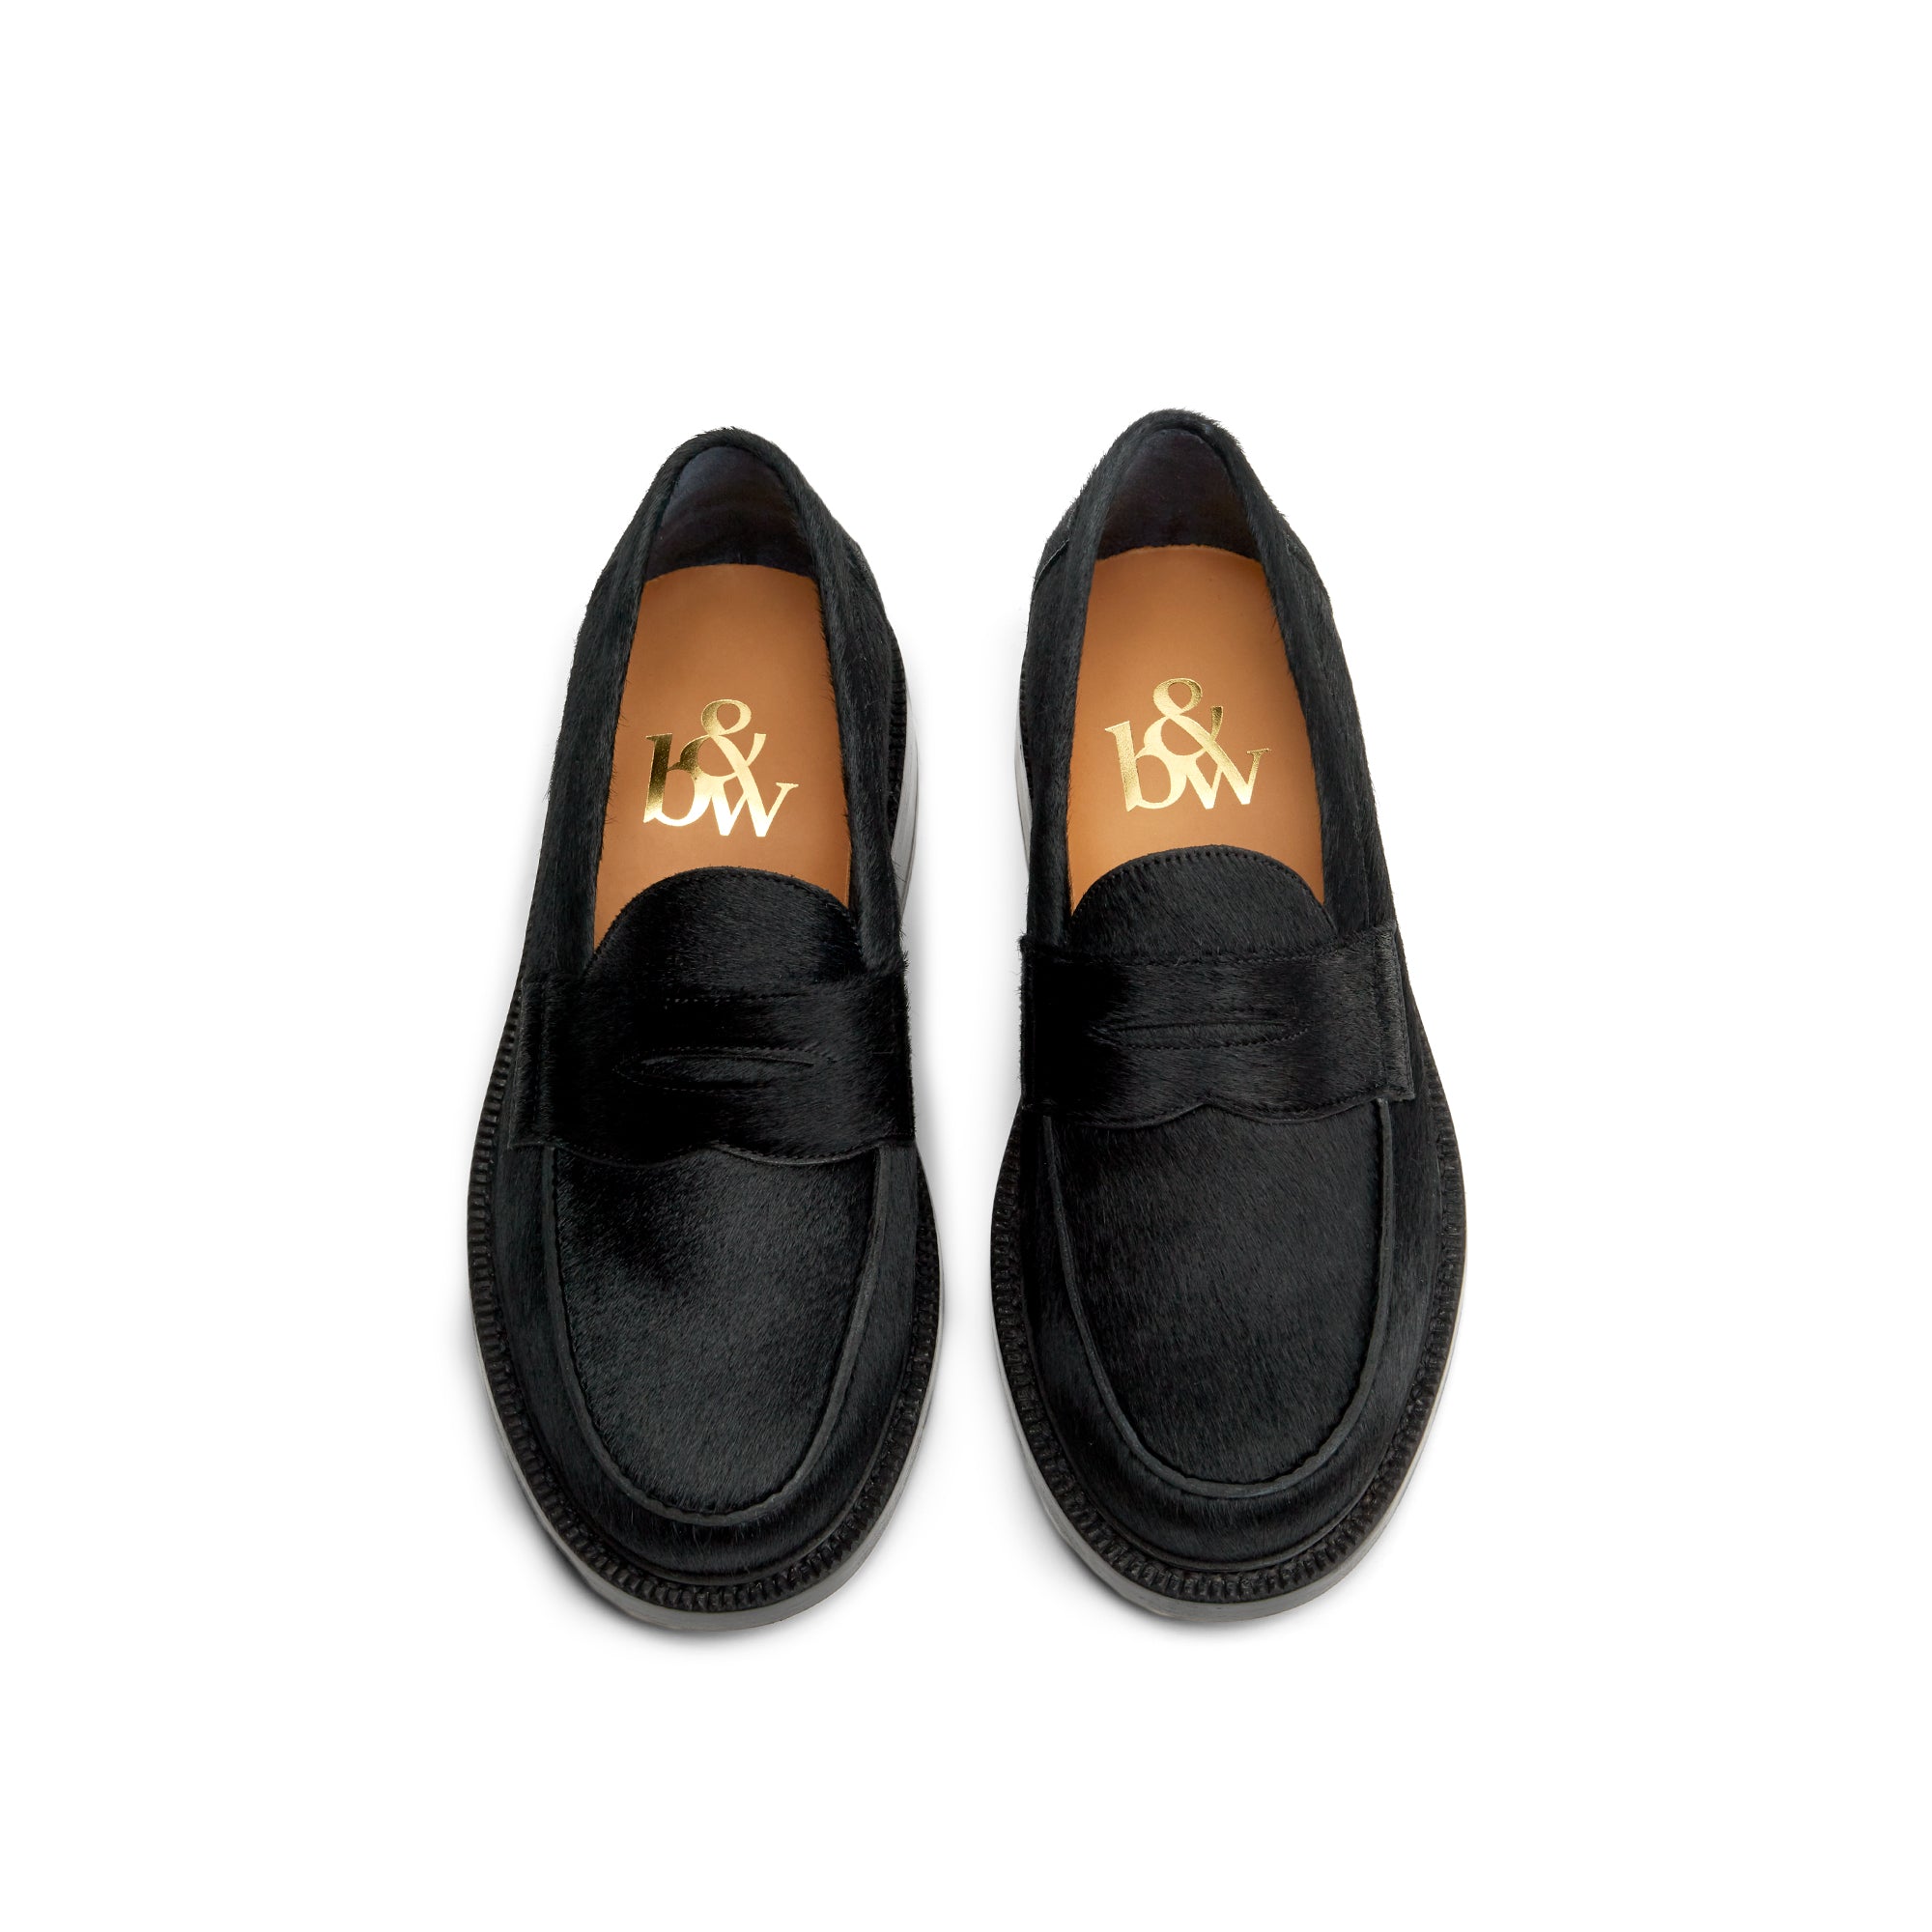 The Ellis Penny Loafer, Mustang